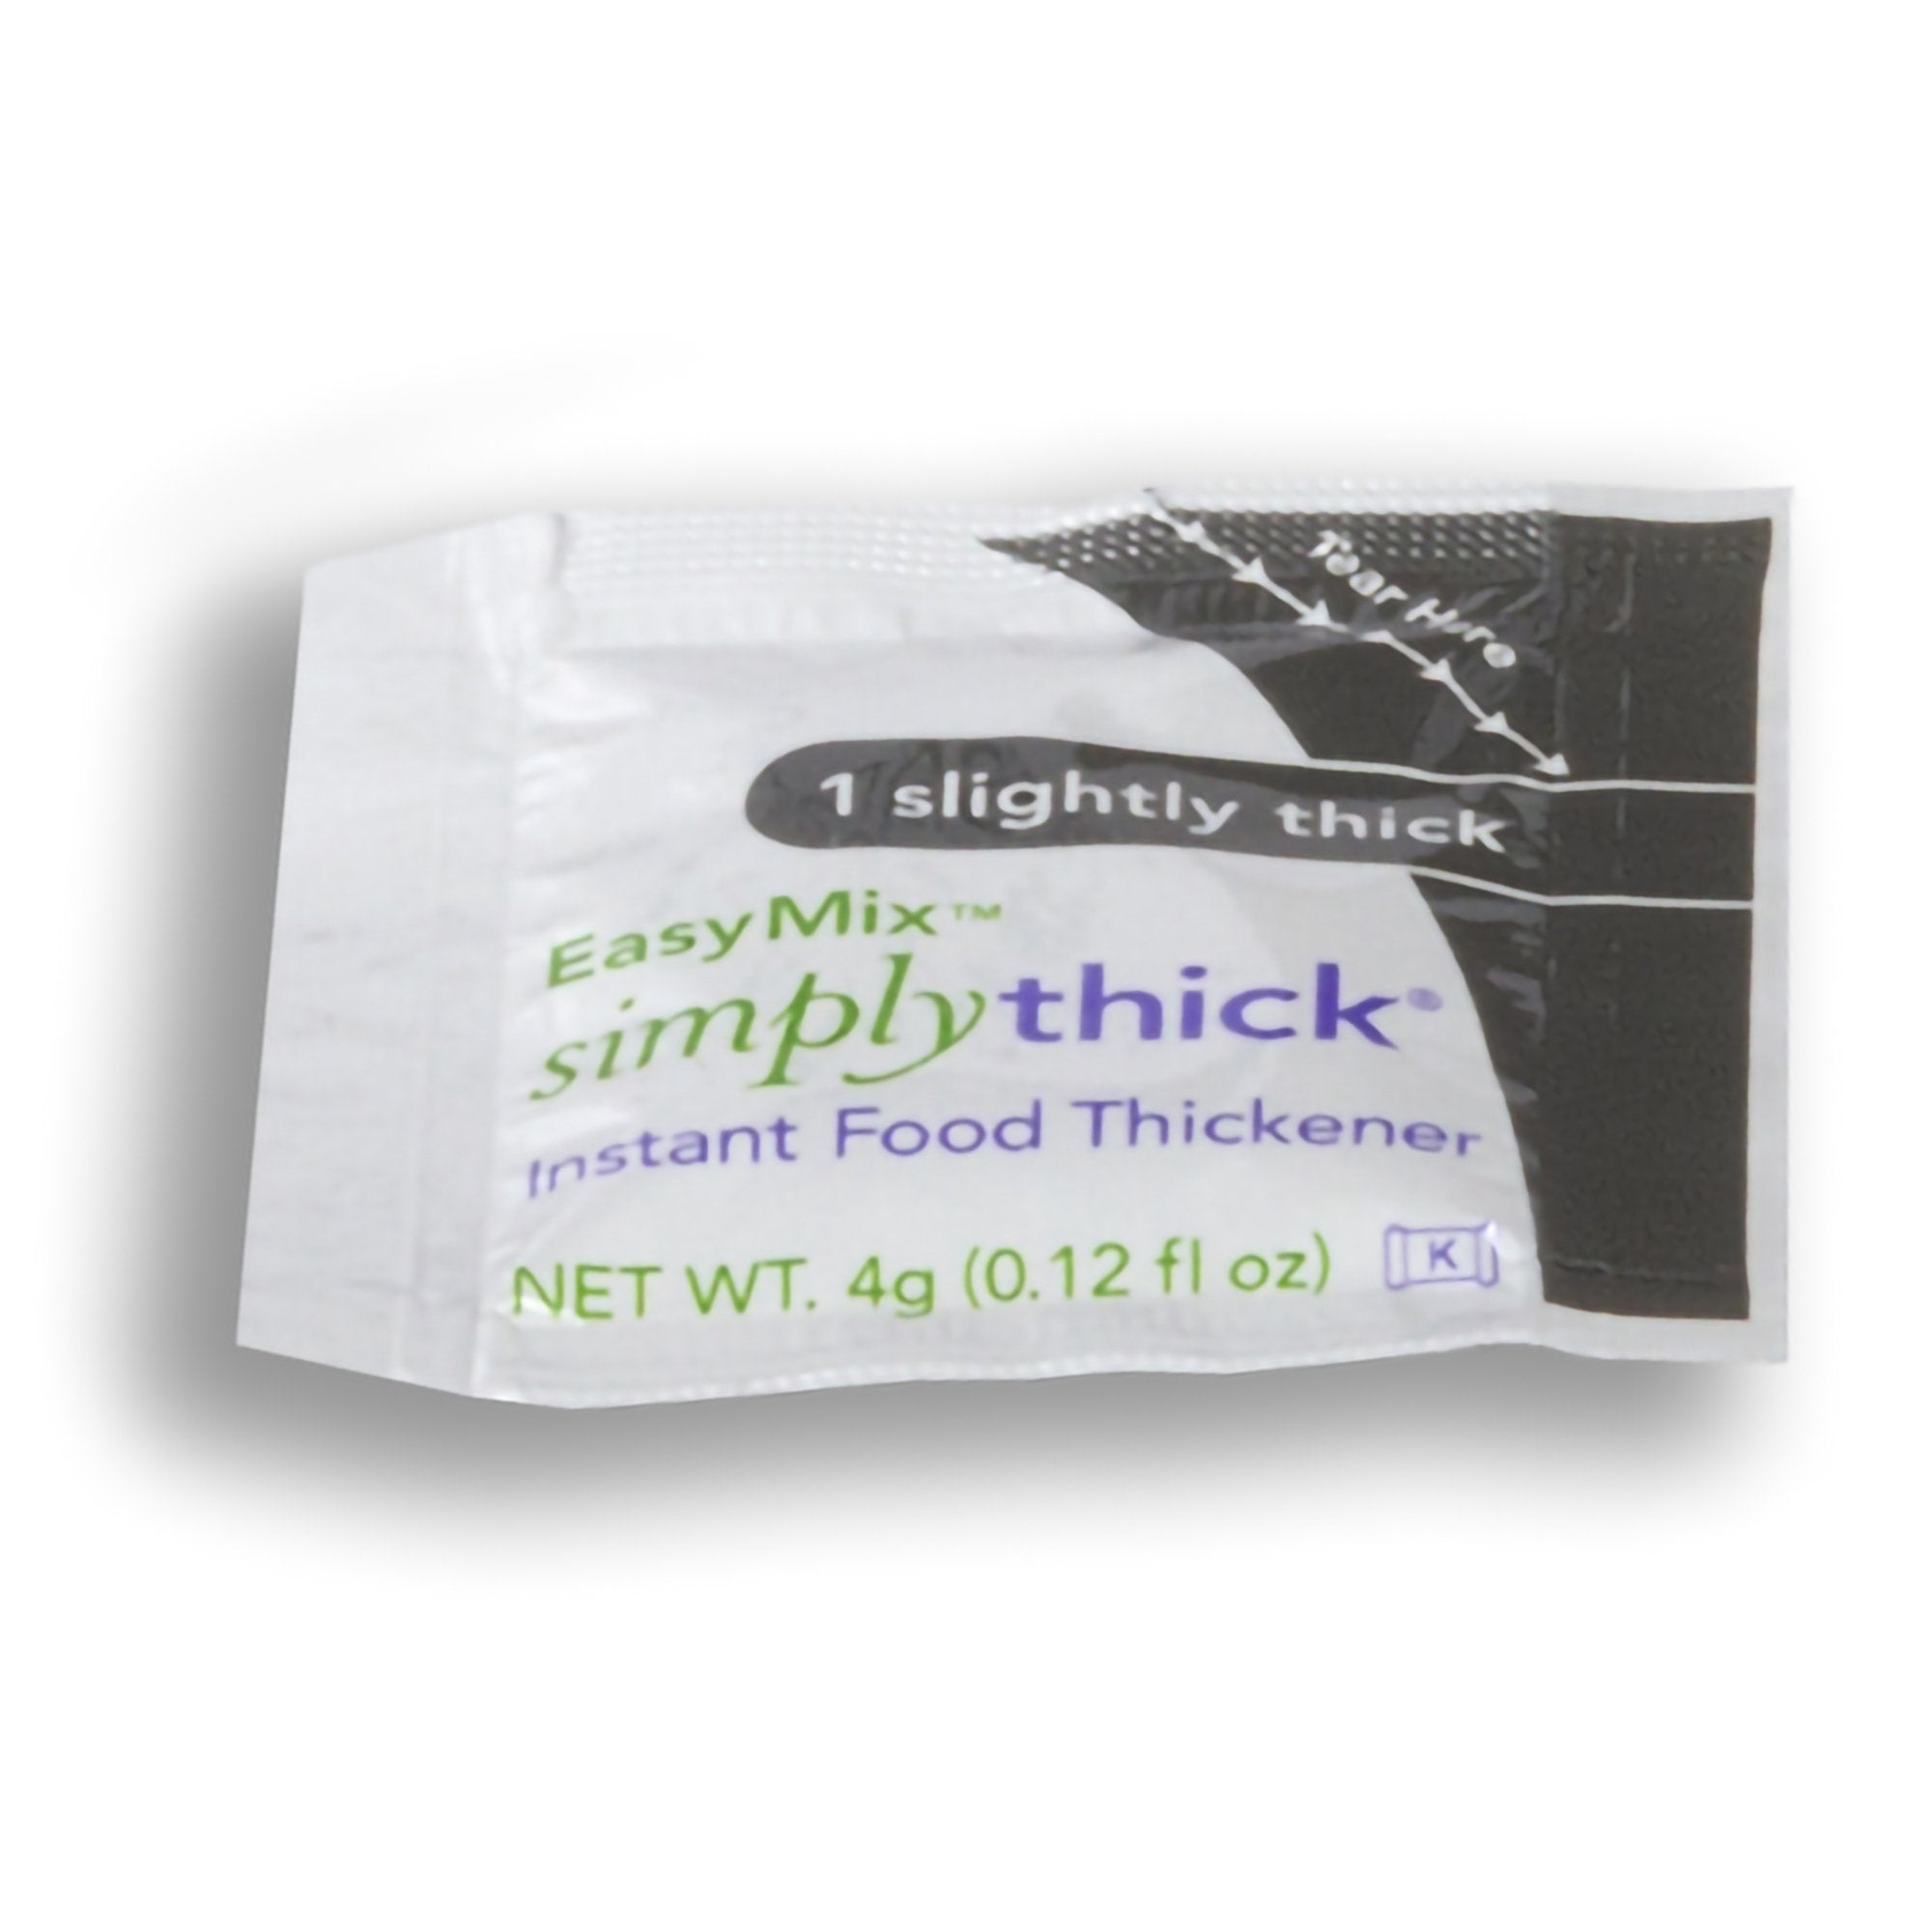 Food and Beverage Thickener SimplyThick Easy Mix 4 oz. Individual Packet Unflavored Gel IDDSI Level 1 Slightly Thick